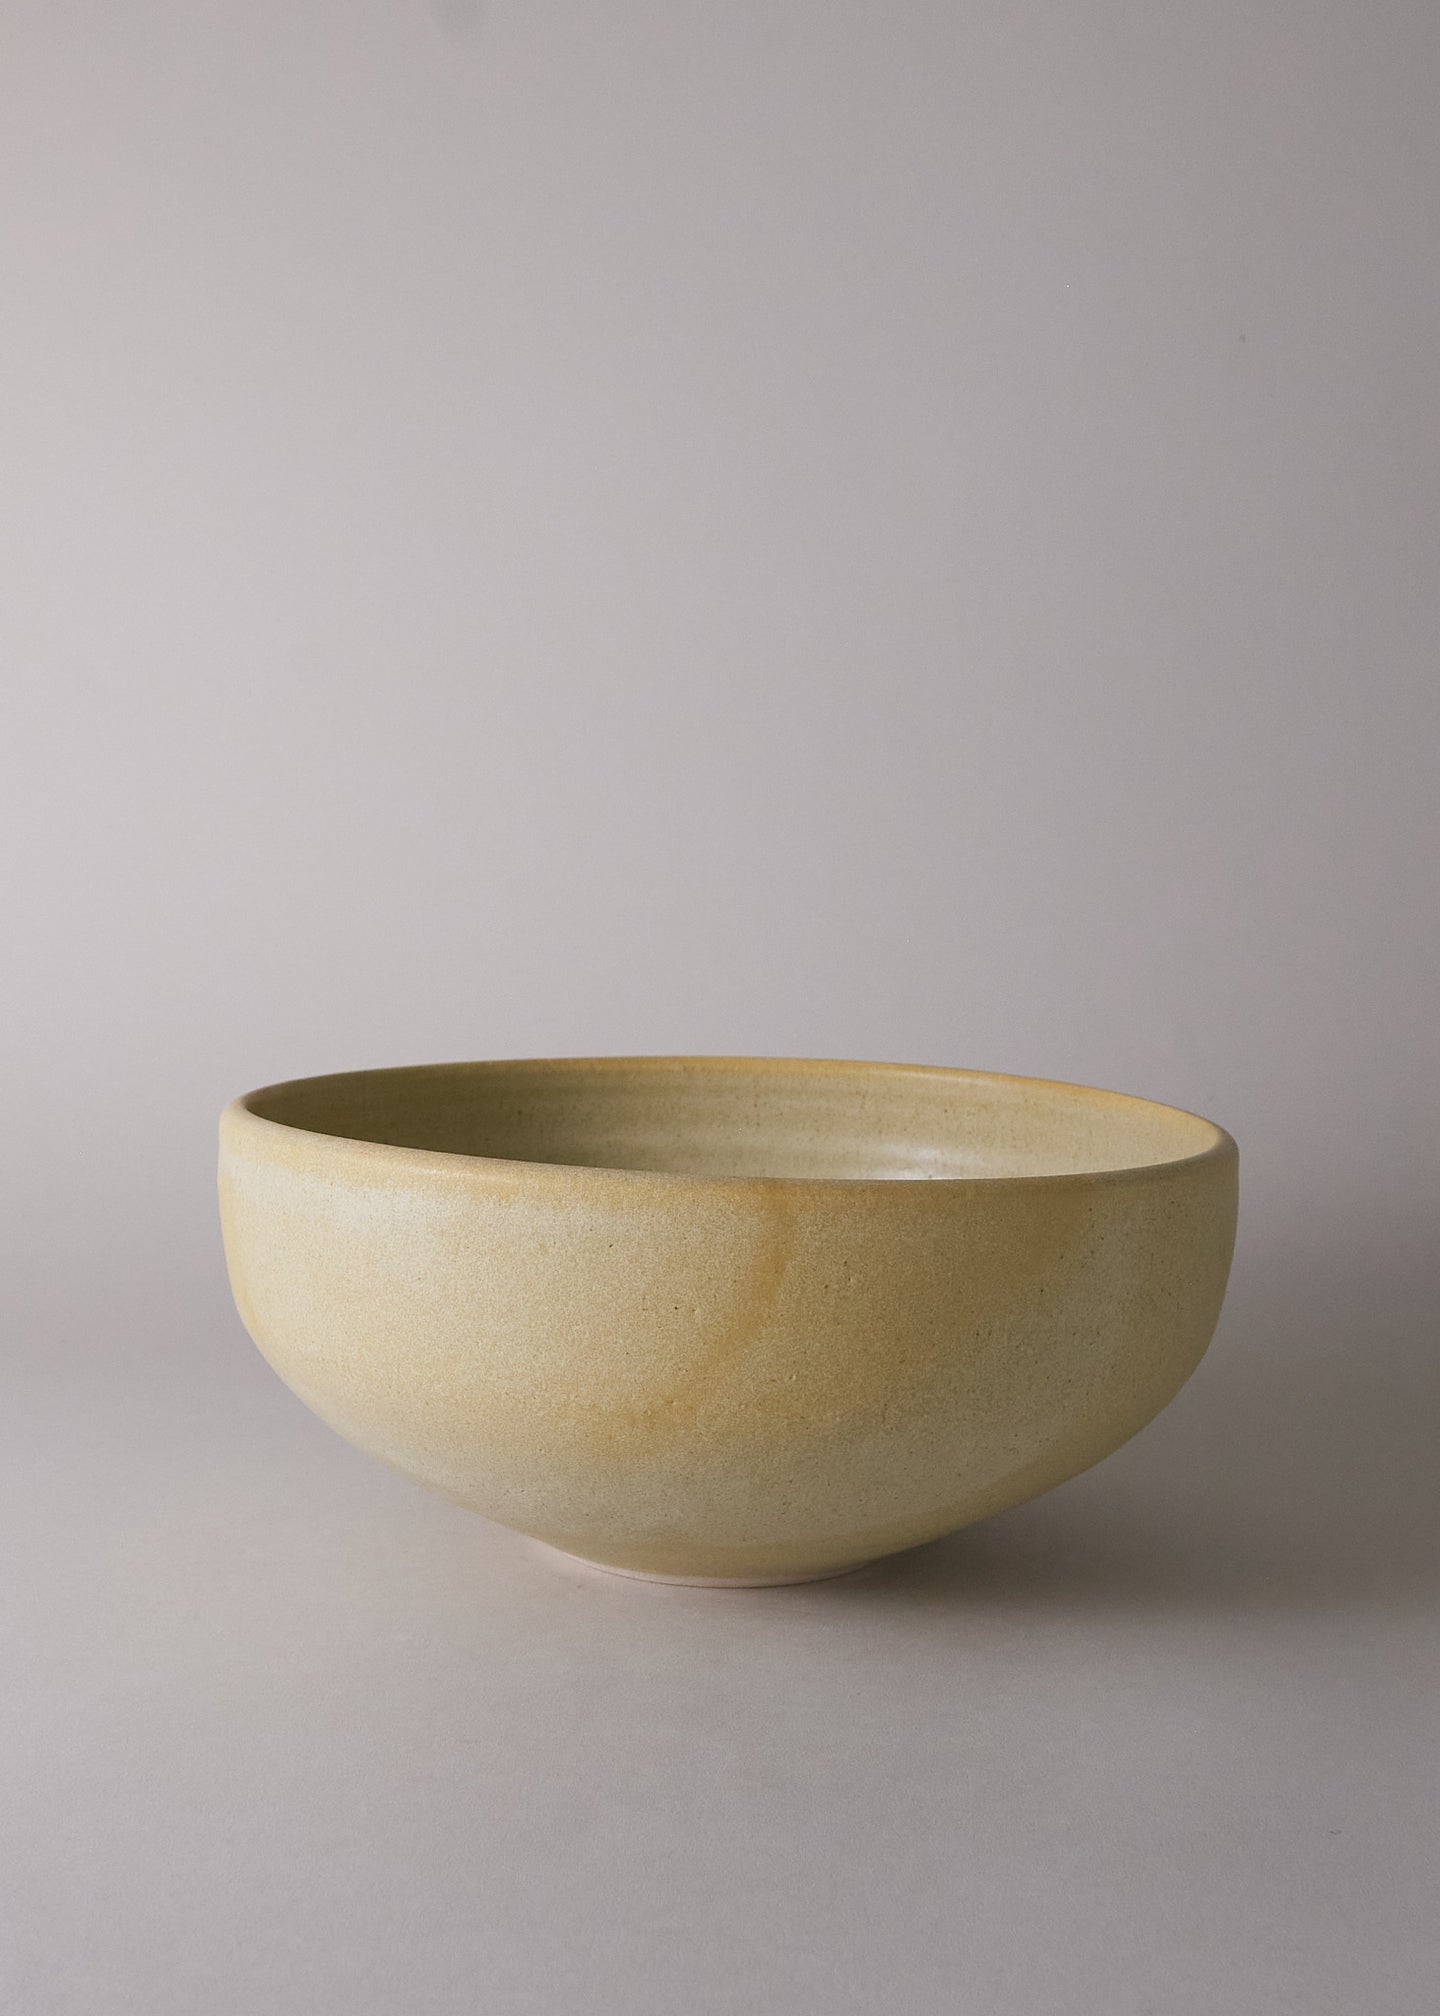 Lucy Series bowl No. 2 in Ochre - Victoria Morris Pottery